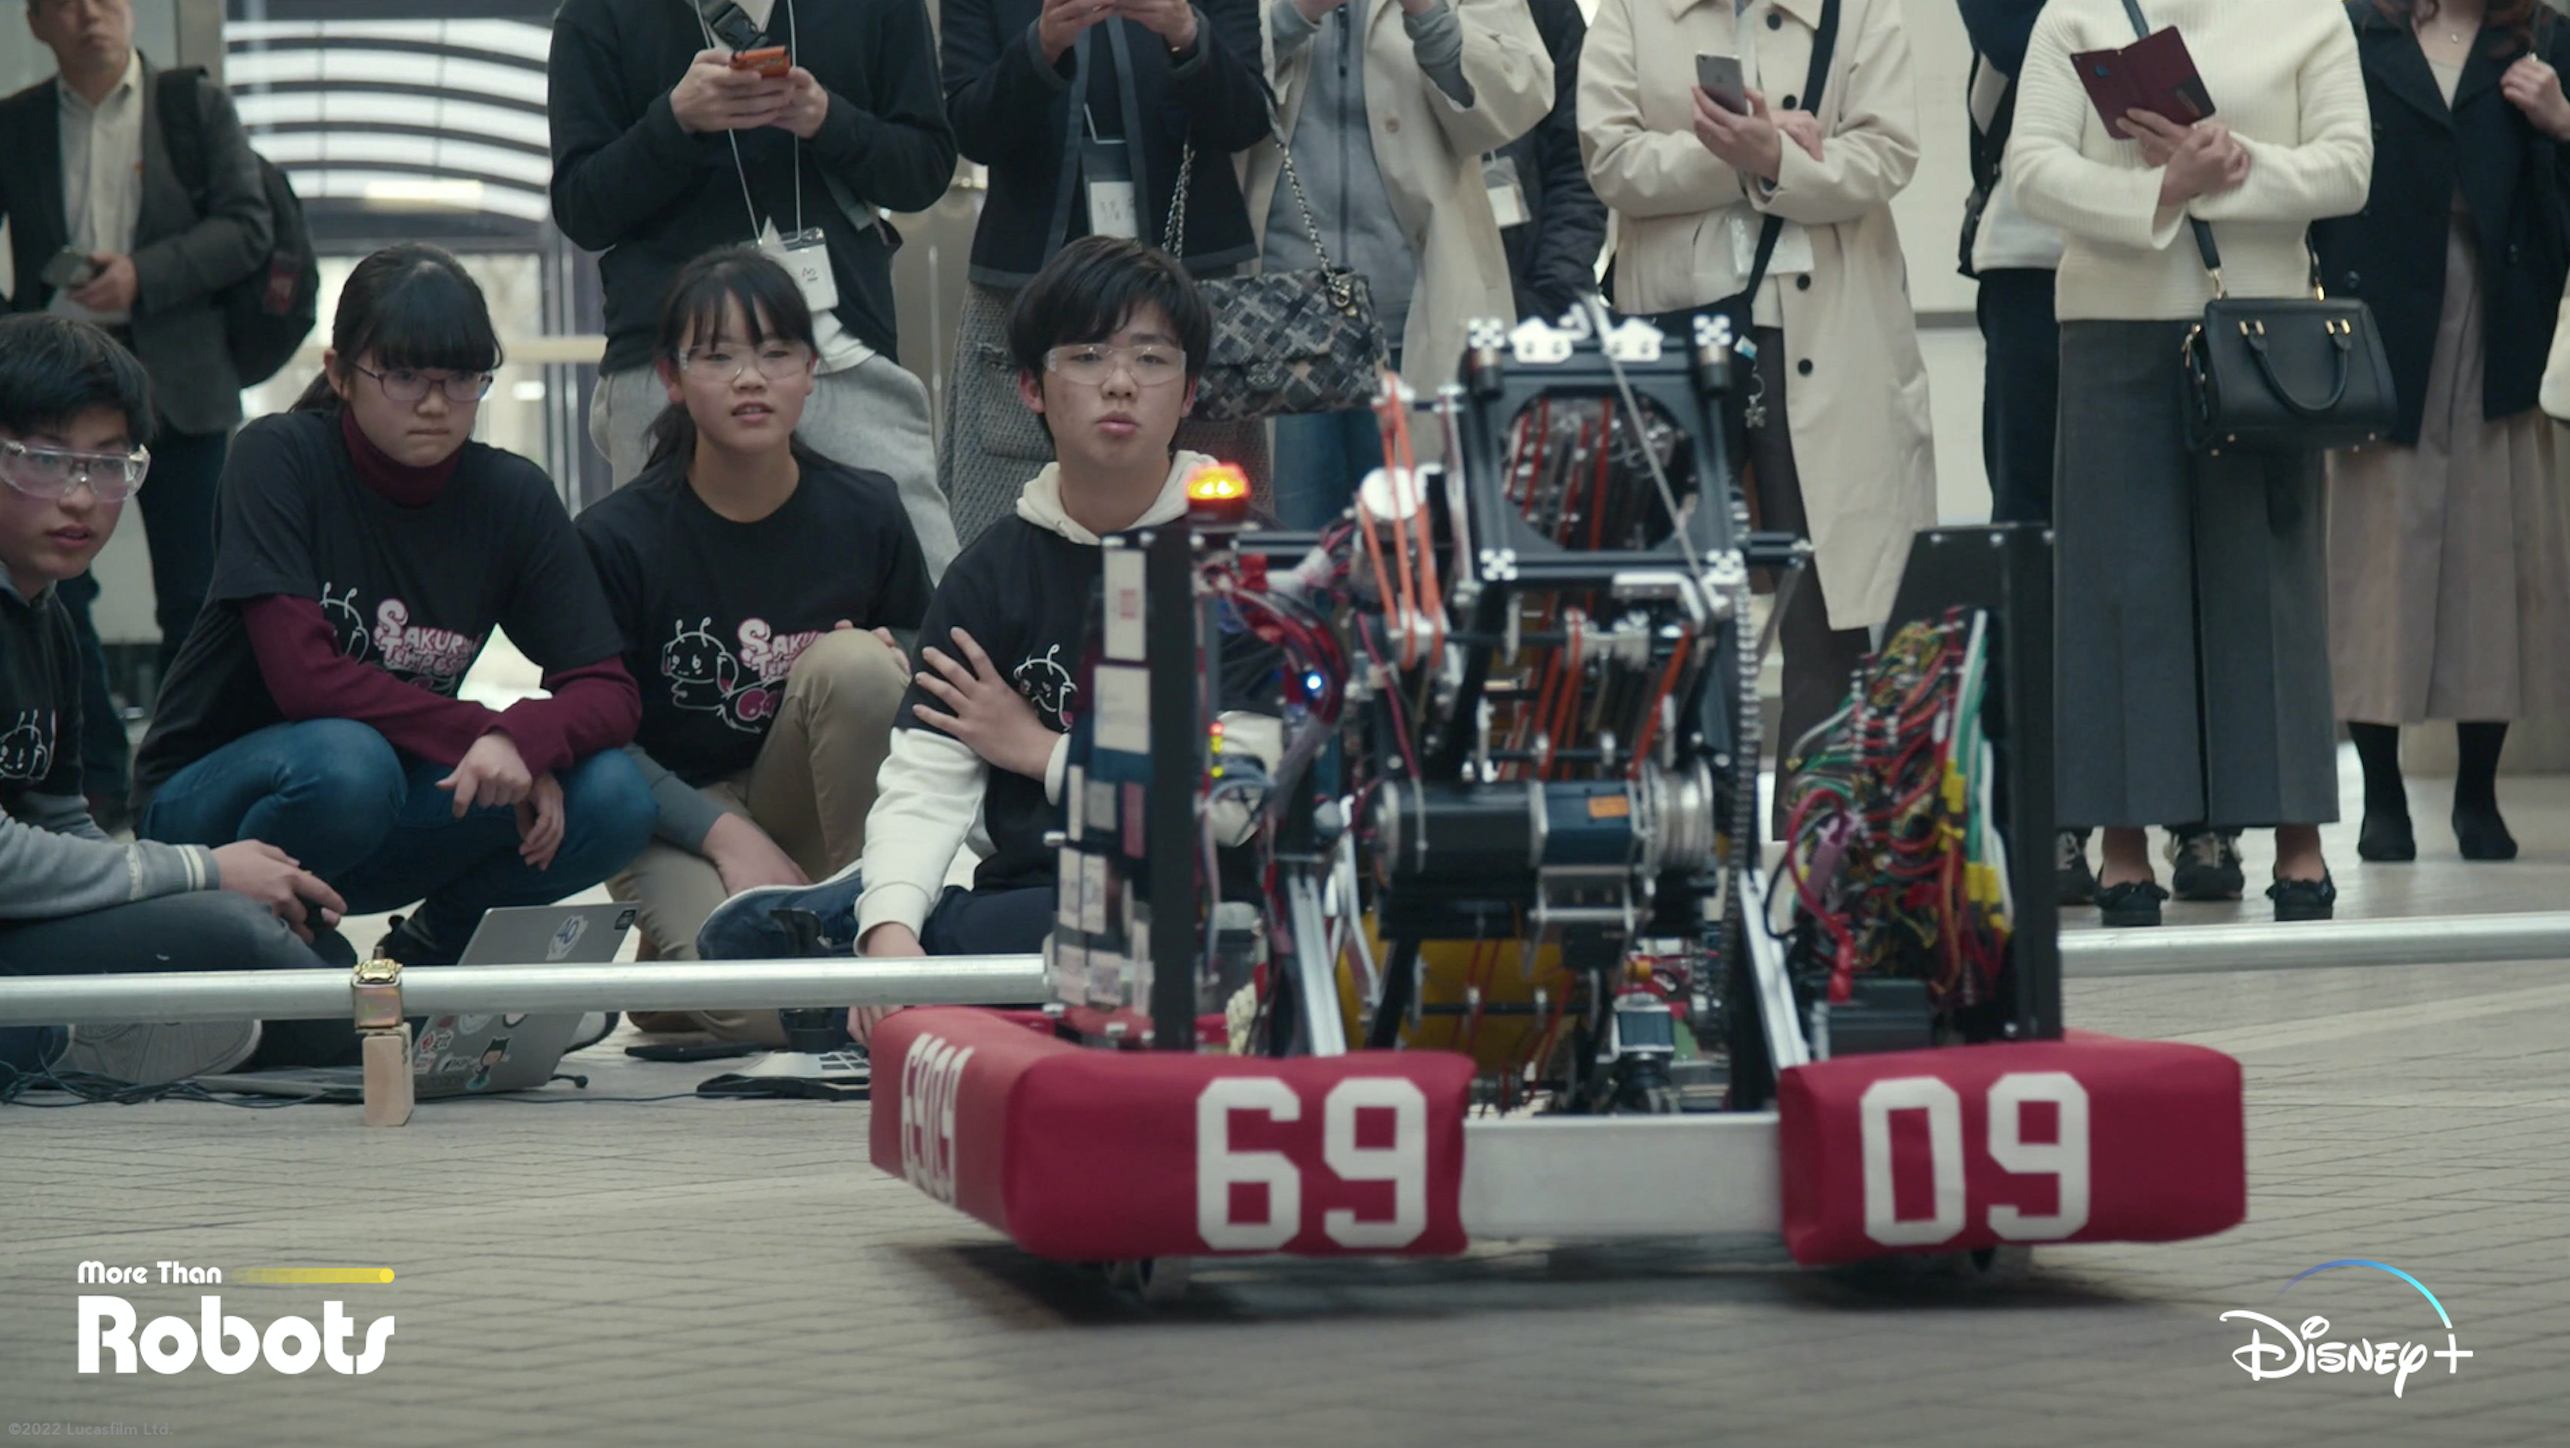 Disney+ Documentary ‘More Than Robots’ to Premiere at SXSW